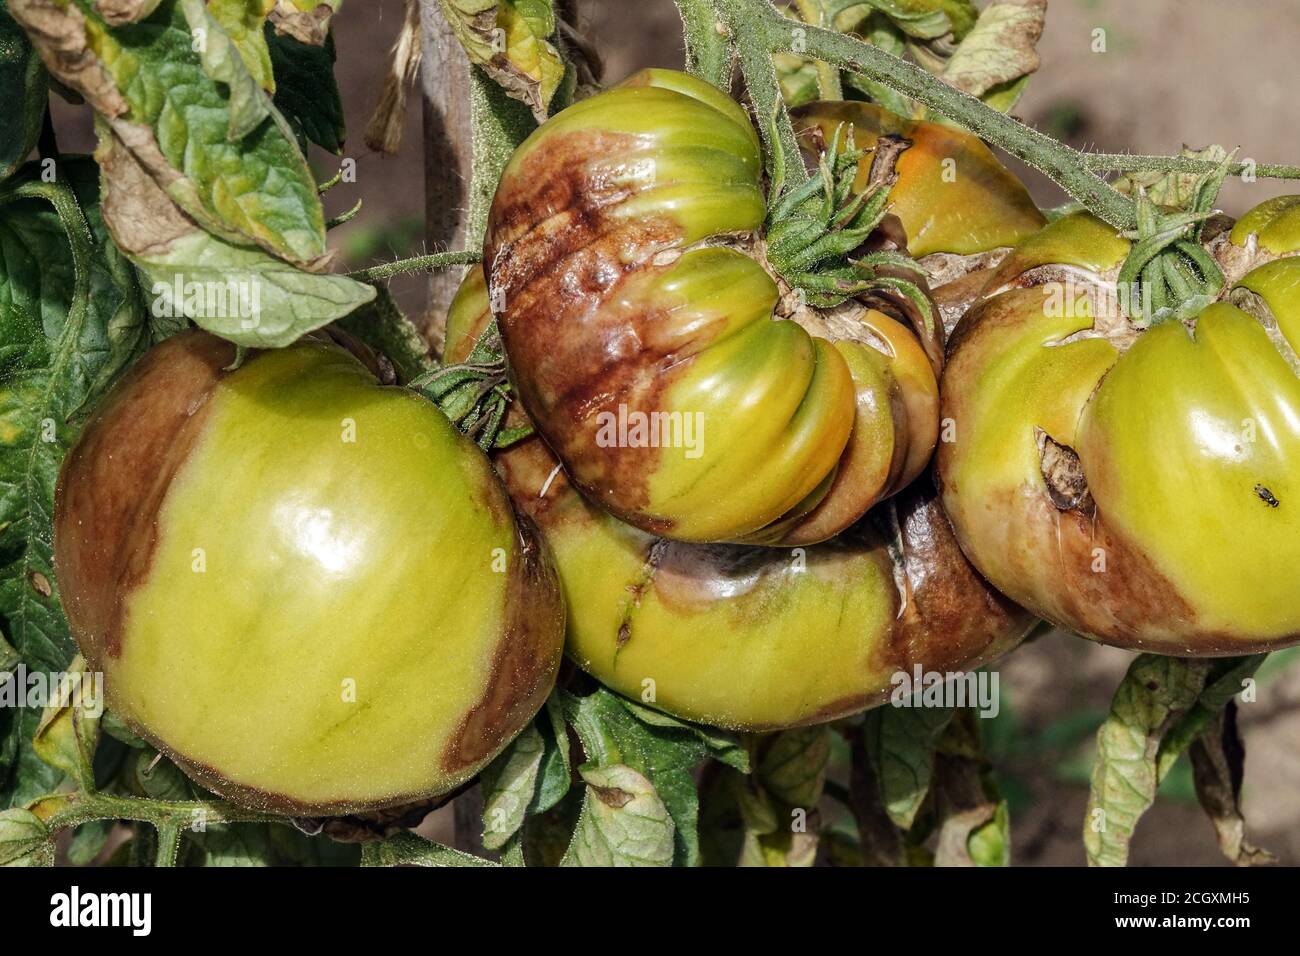 Phytophthora infestans diseases tomato blight tomatoes brown spots Solanum lycopersicum plant Stock Photo